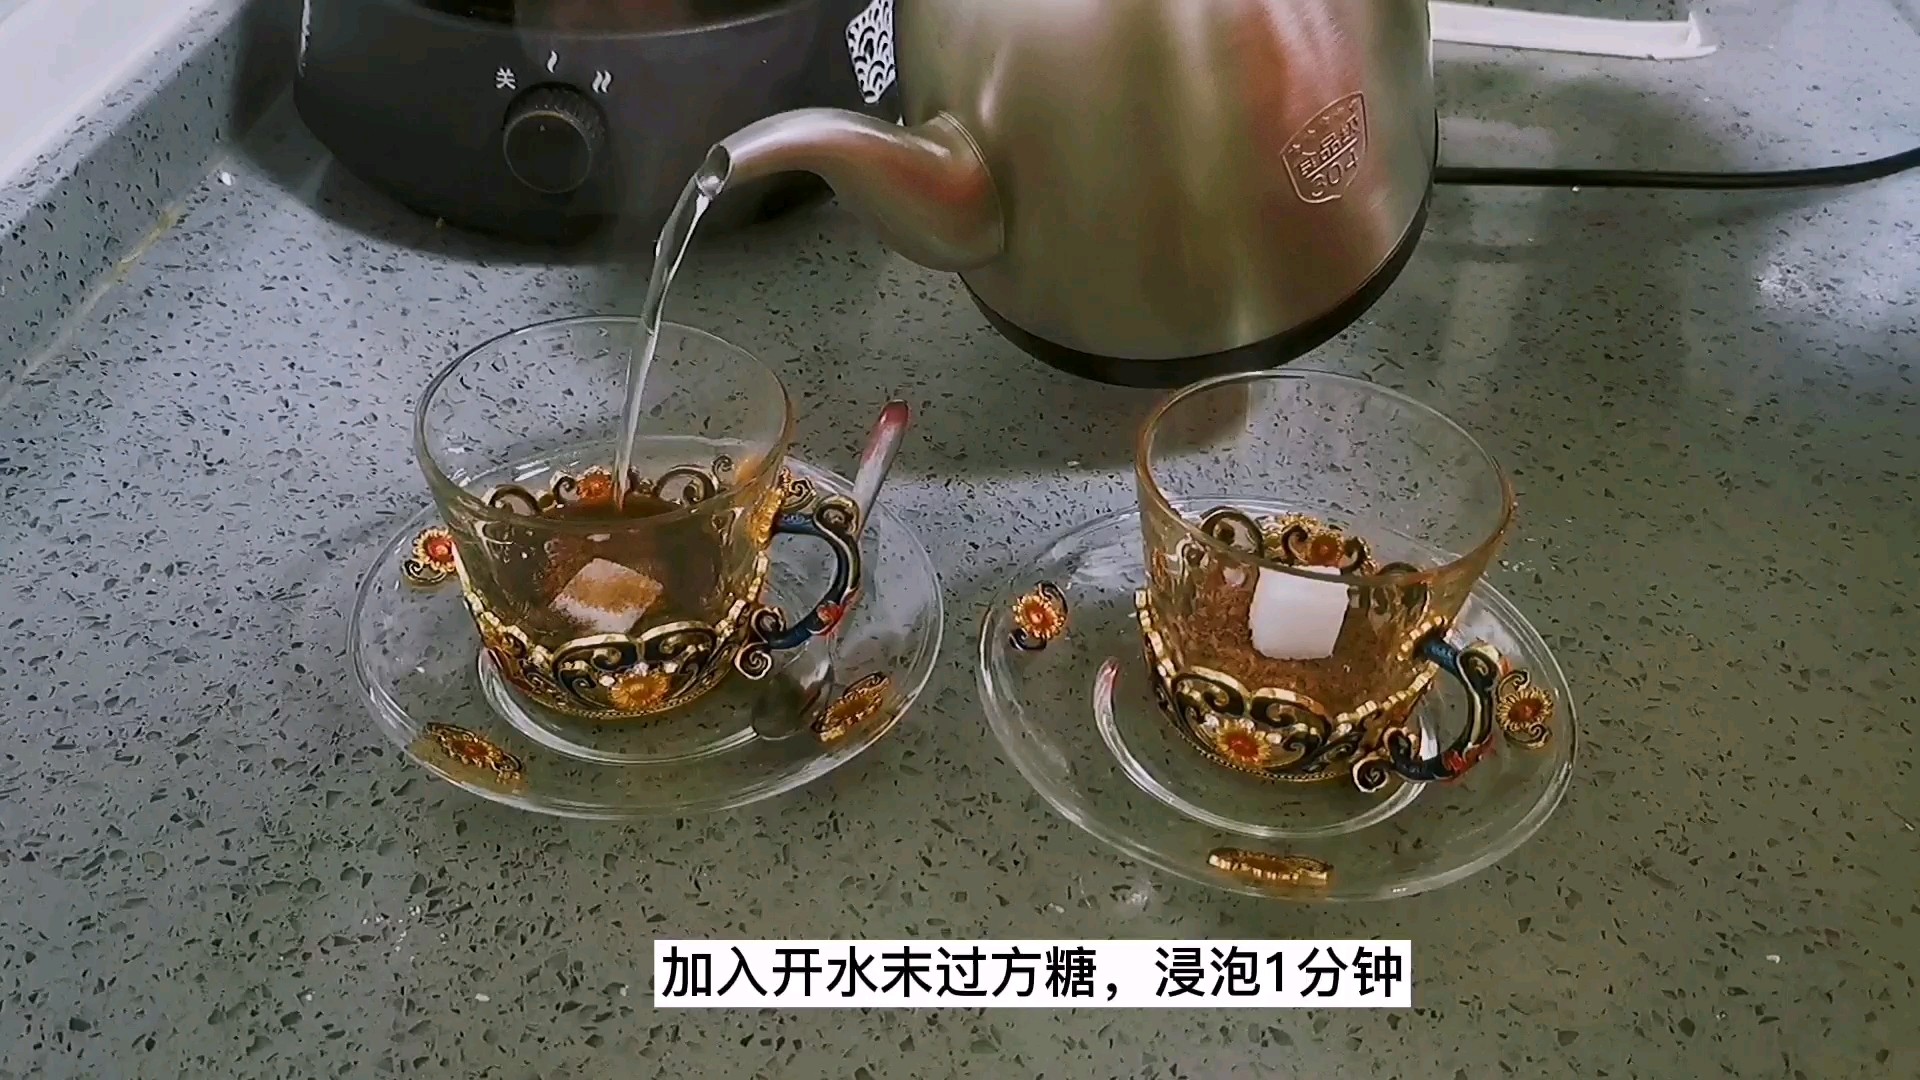 Energetic Afternoon Tea: A Cup of Hot Milk Coffee is Enough recipe